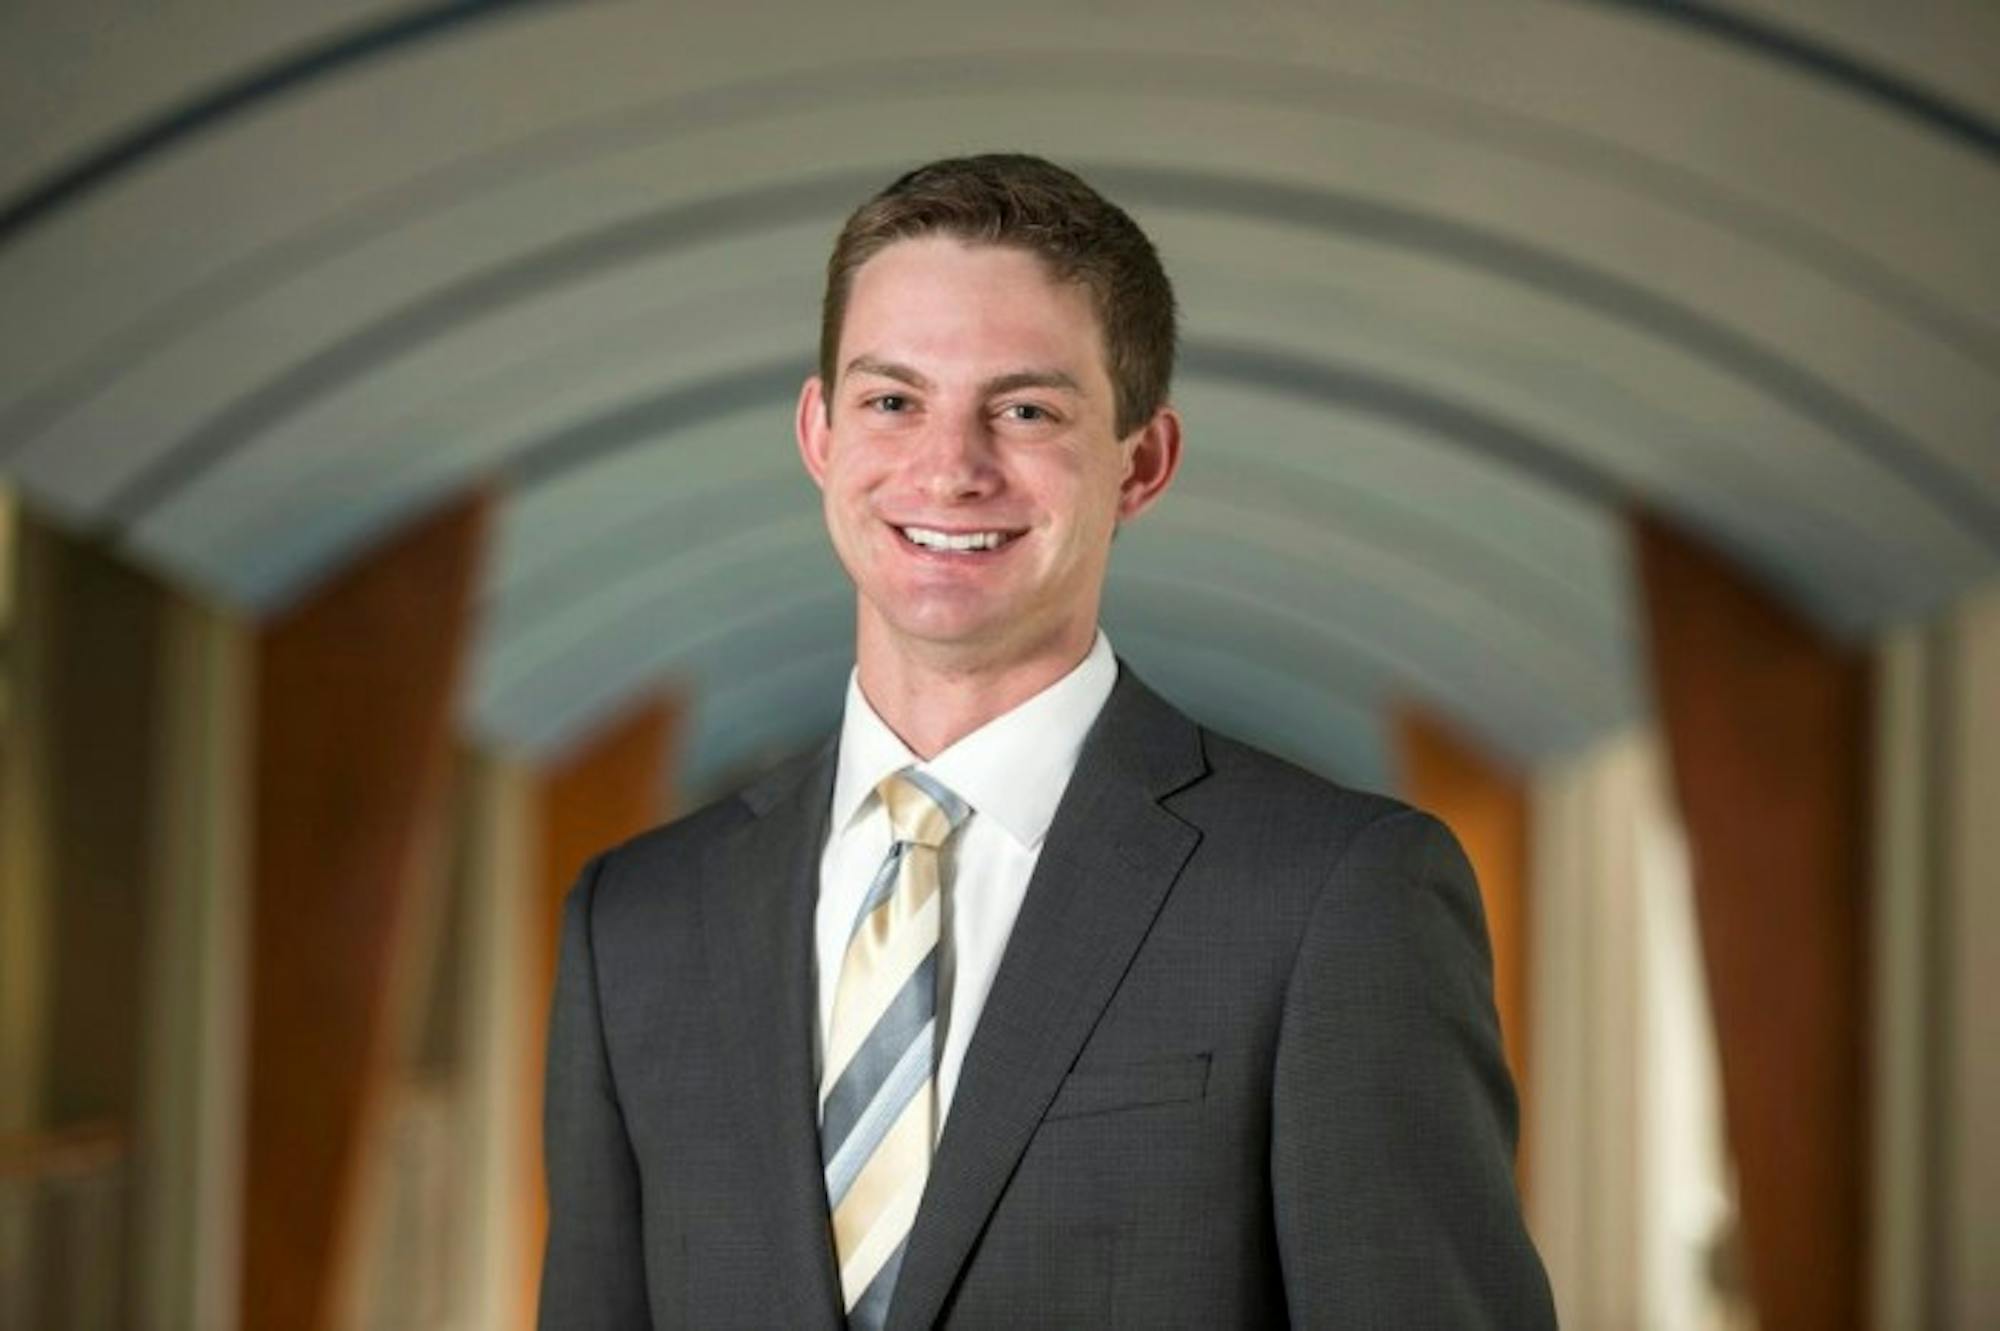 Finance major Stephen Schafer was named Notre Dame’s first salutatorian in 45 years Monday.